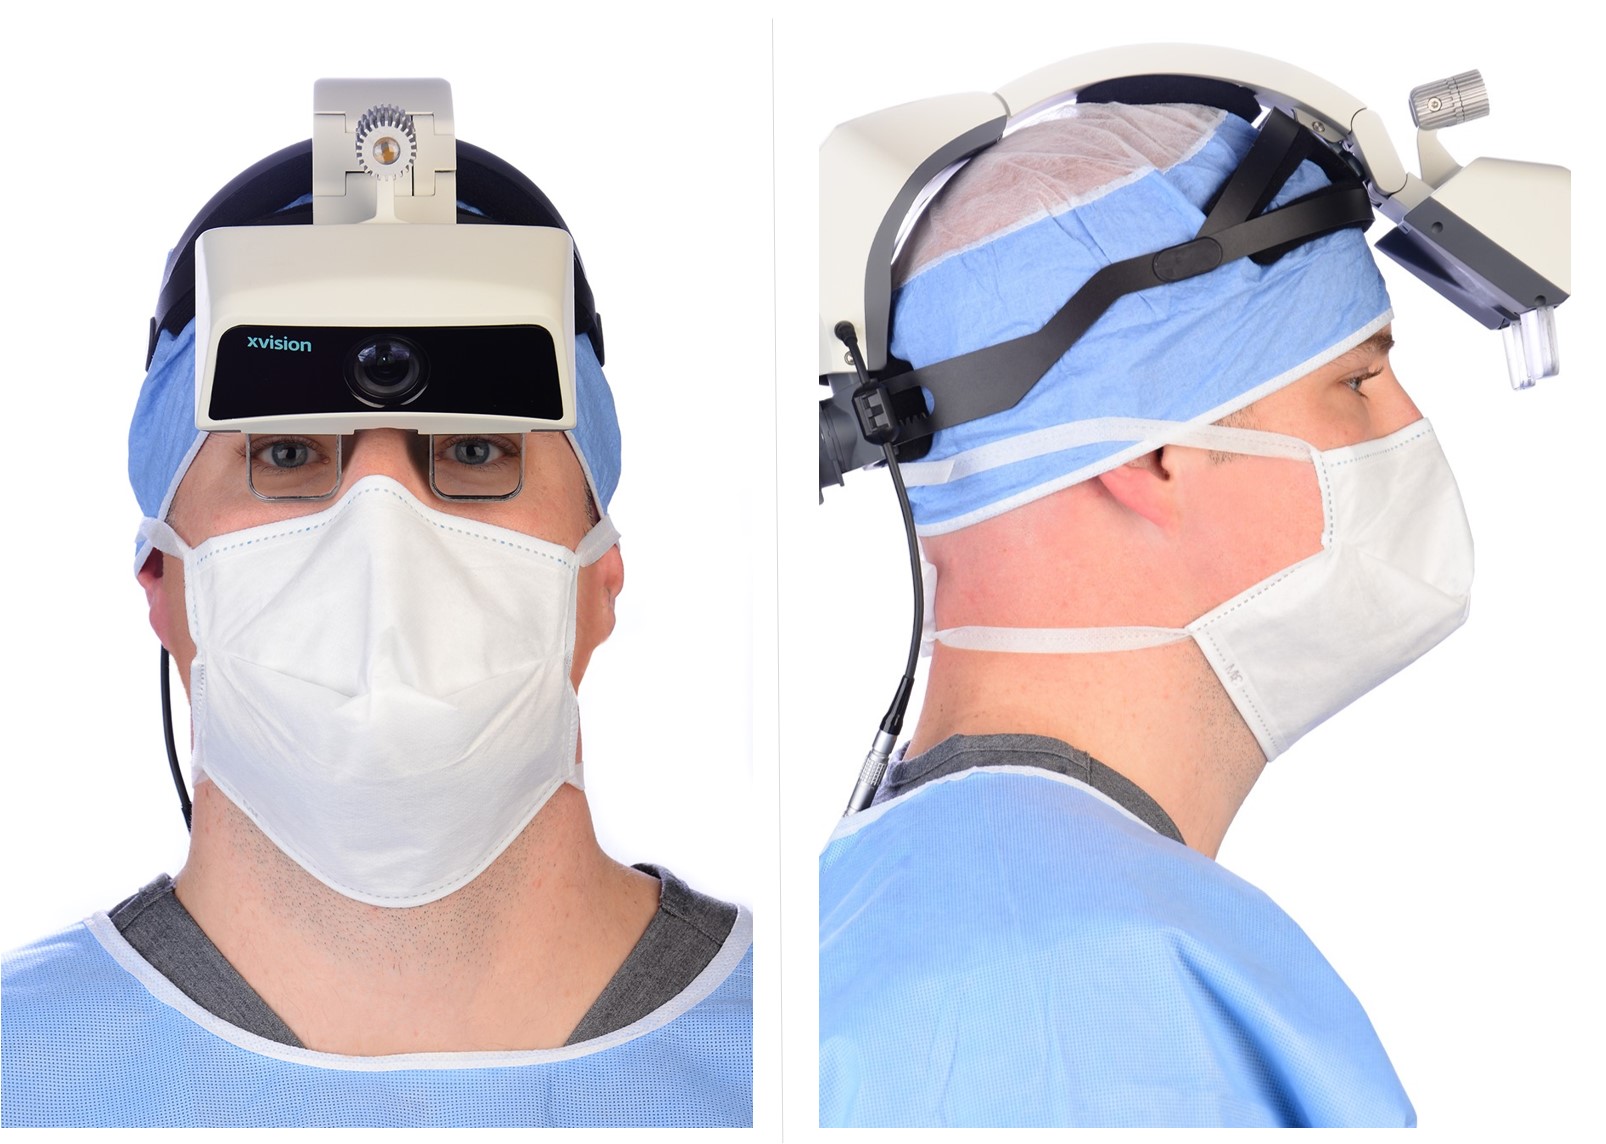 front and side view of xvision augmented reality spine systems headset Dr. Sung and PA doctors with augmented reality spine system x-ray vision